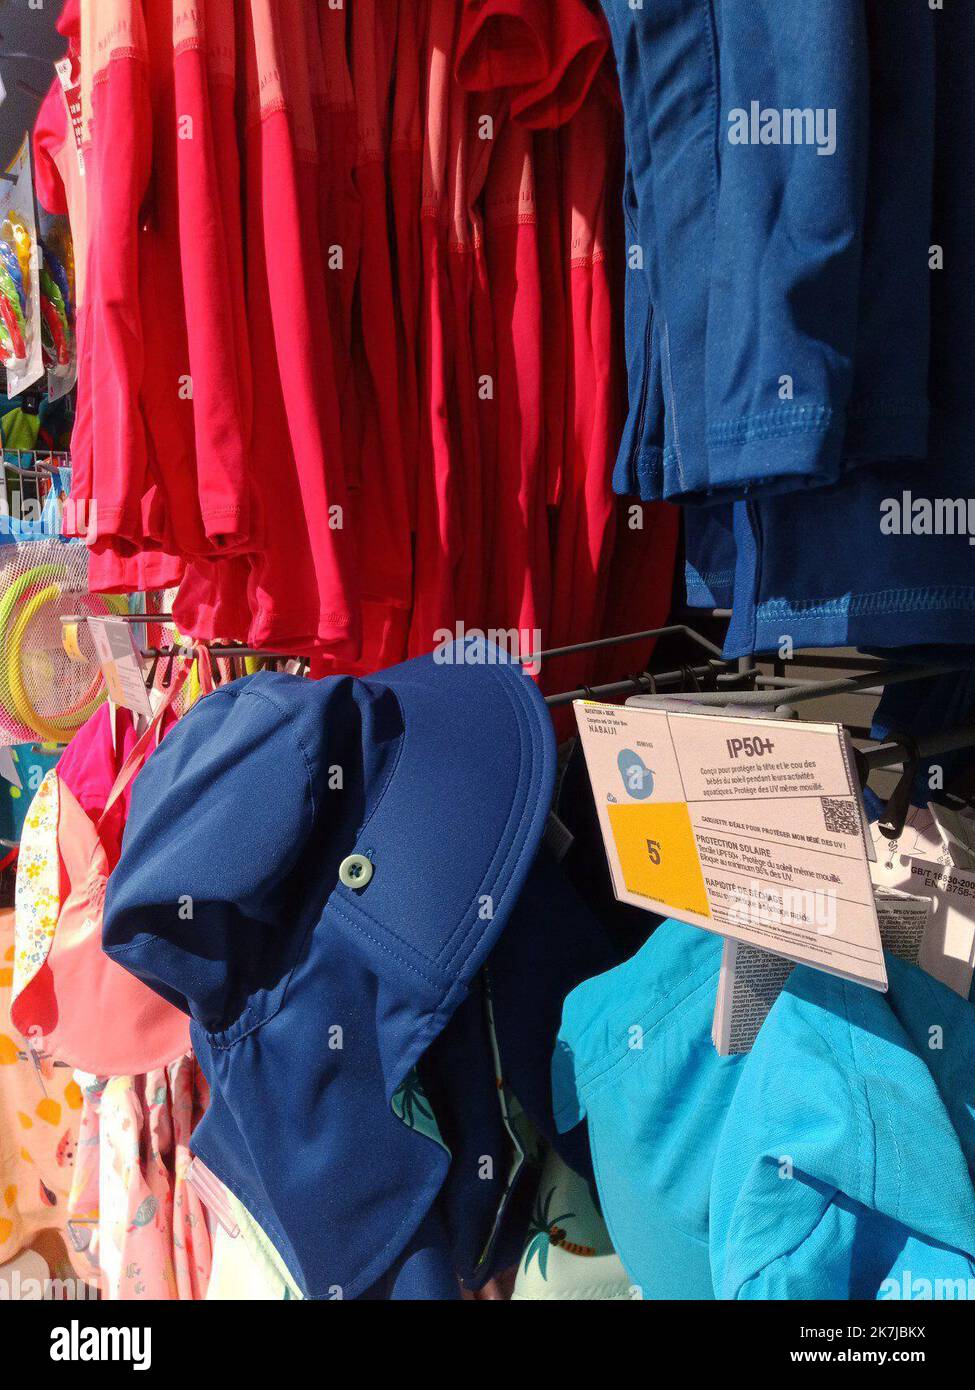 ©B. ROMANKIEWICZ/MAXPPP - NICE 06/2022. GAMME DE VETEMENTS ANTI UV / PROTECTION SOLAIRE / DANS LE RAYON D'UN MAGASIN DECATHLON Nice, France, june 2022. In Decathlon (french sport store), anti-UV clothing for skin protection in summer at the pool, the beach or during water activities Stock Photo